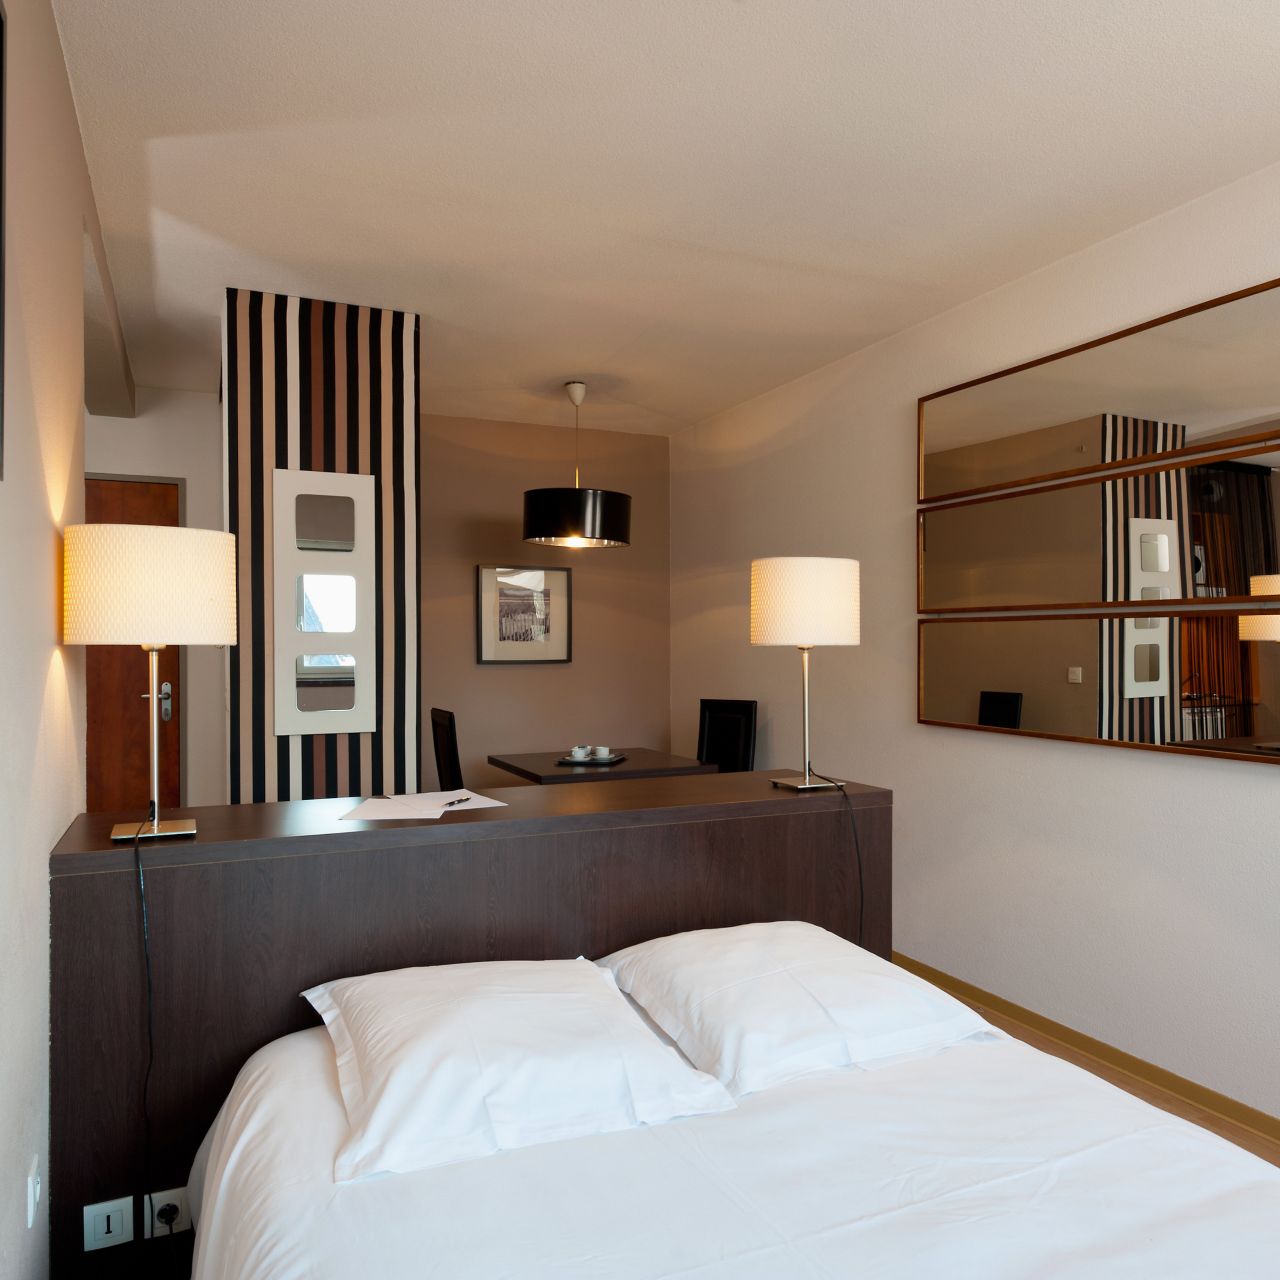 Teneo Apparthotel Bordeaux - Gare Saint Jean Residence Hoteliere - Great  prices at HOTEL INFO